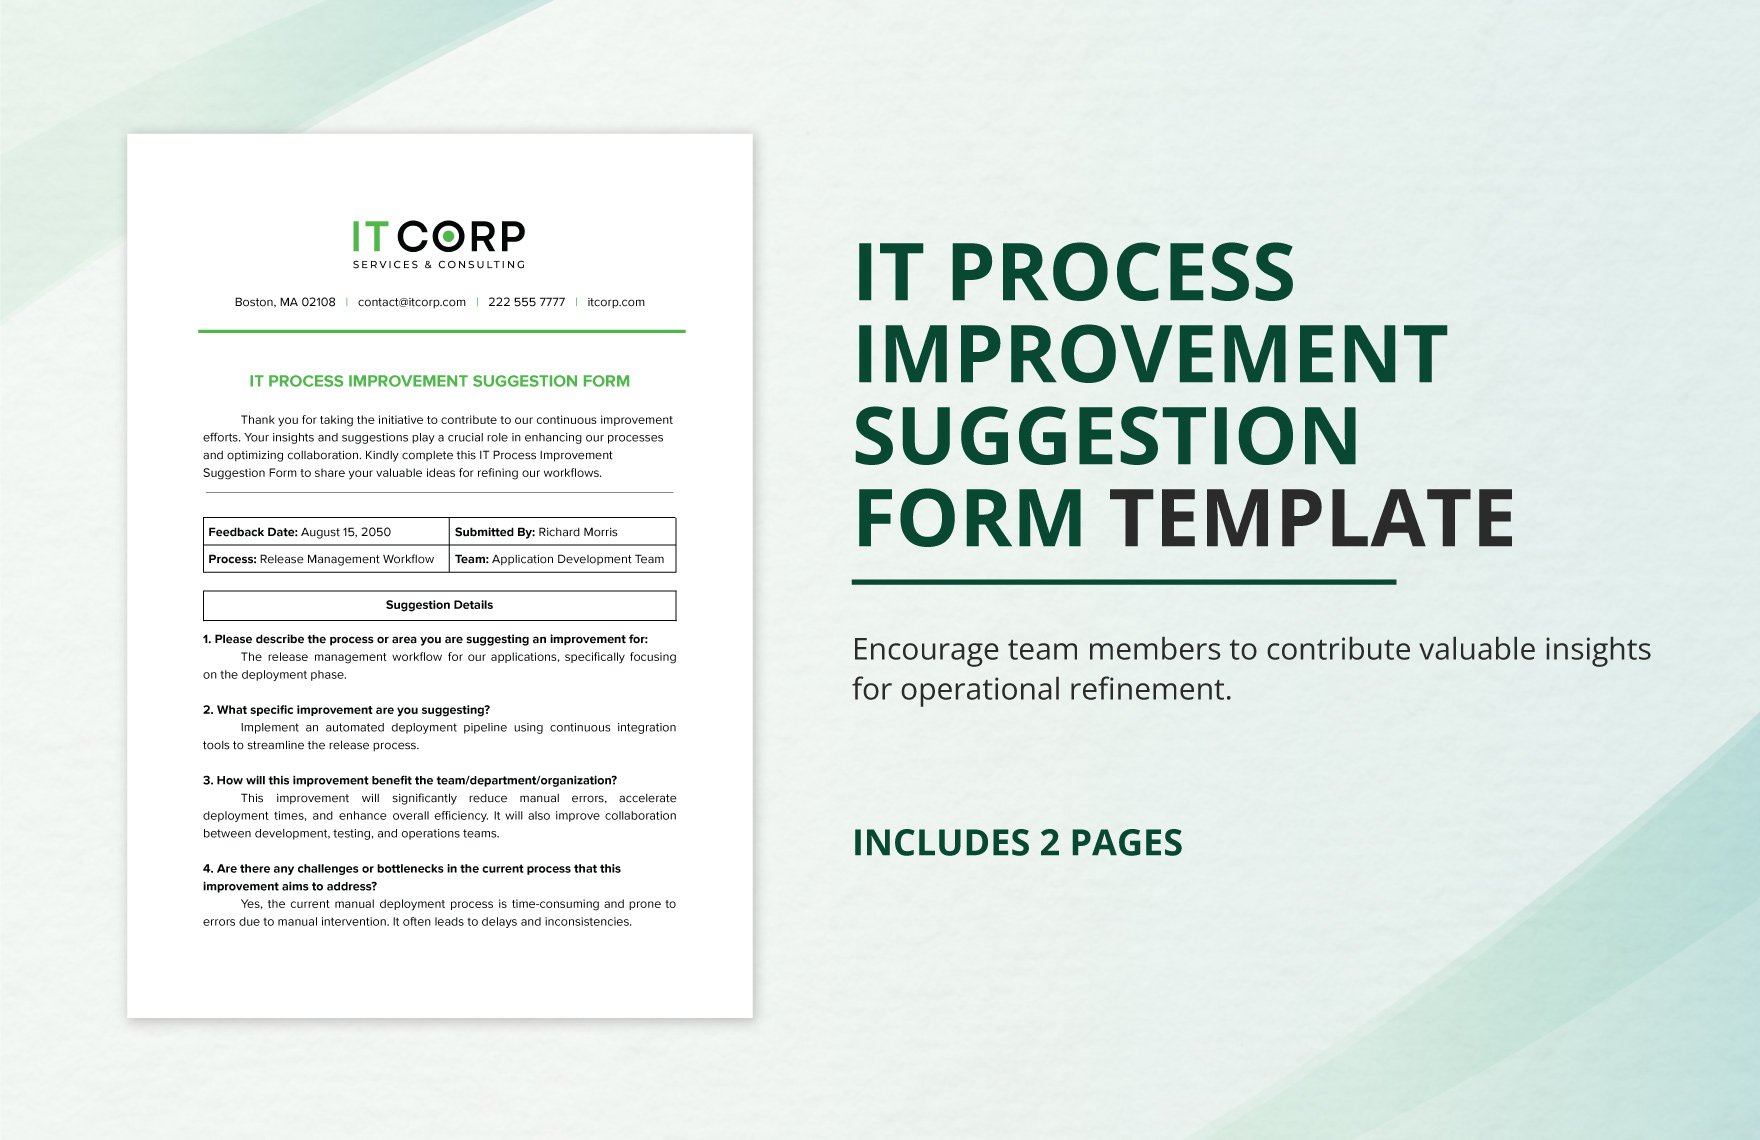 IT Process Improvement Suggestion Form Template